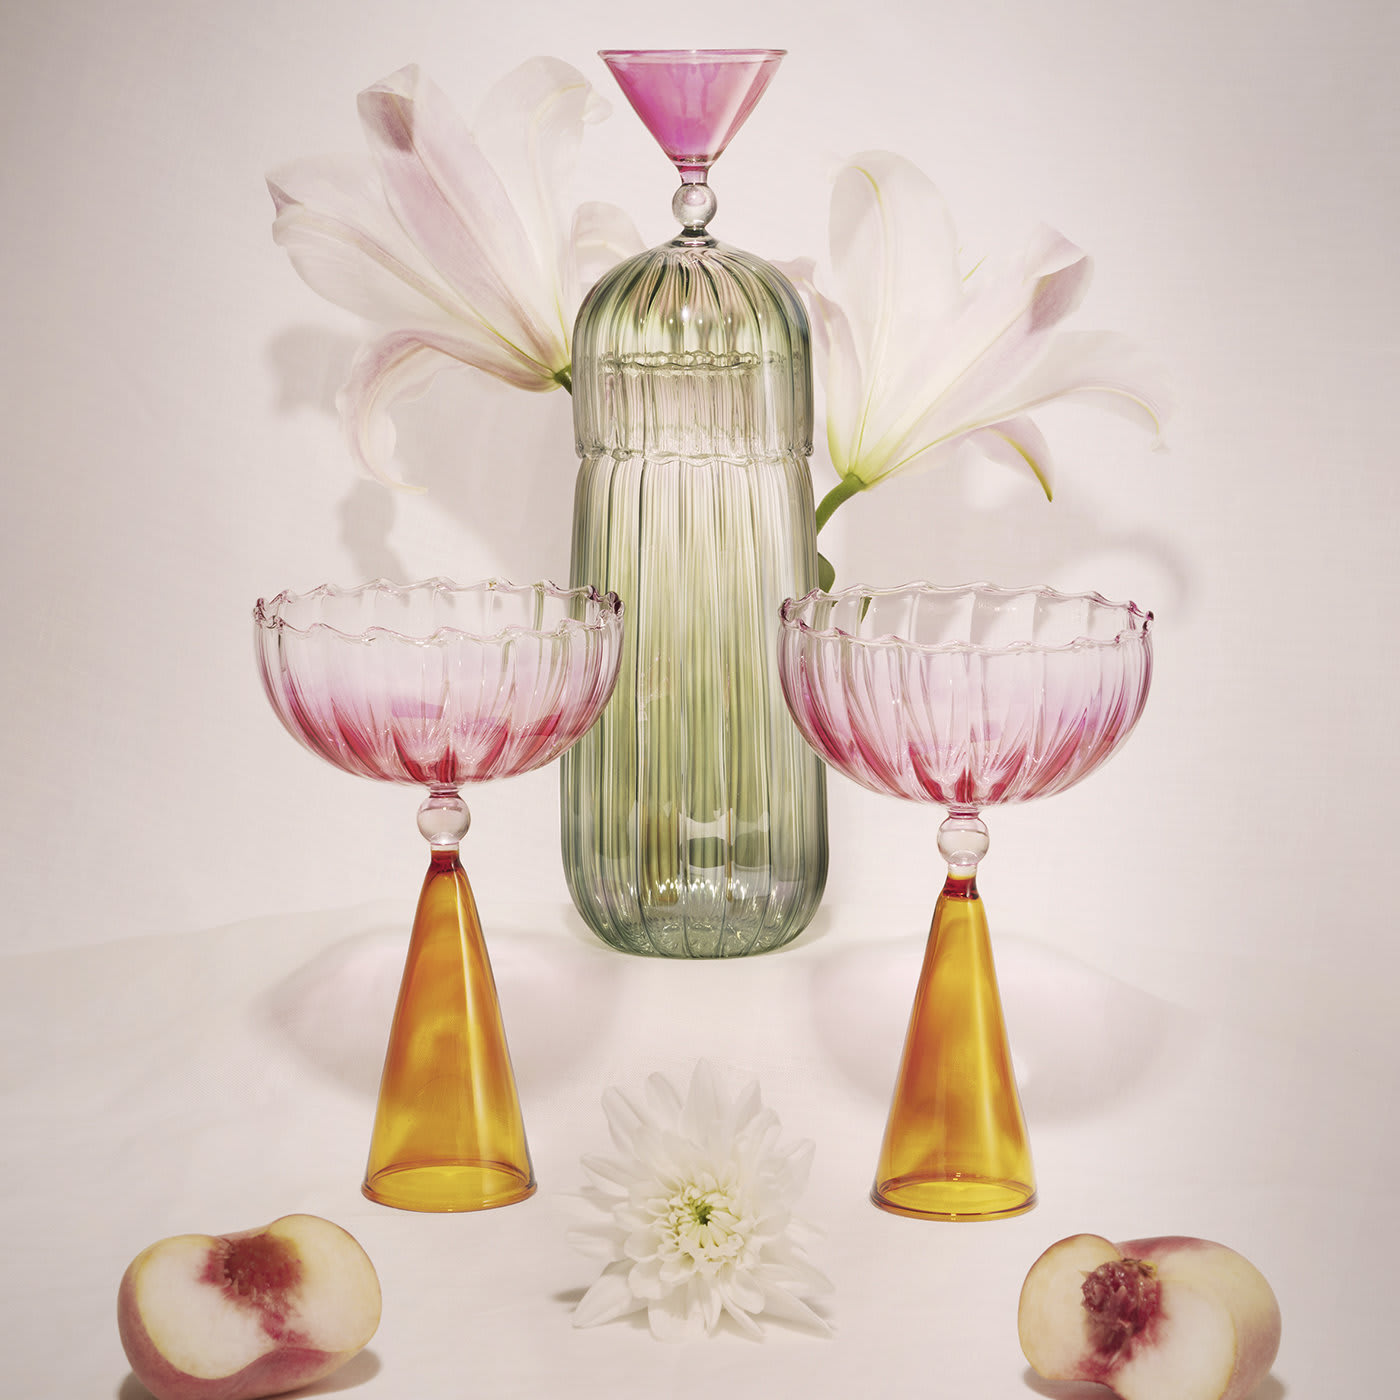 Set of 2 Calypso Pink and Amber Champagne Glasses - Serena Confalonieri